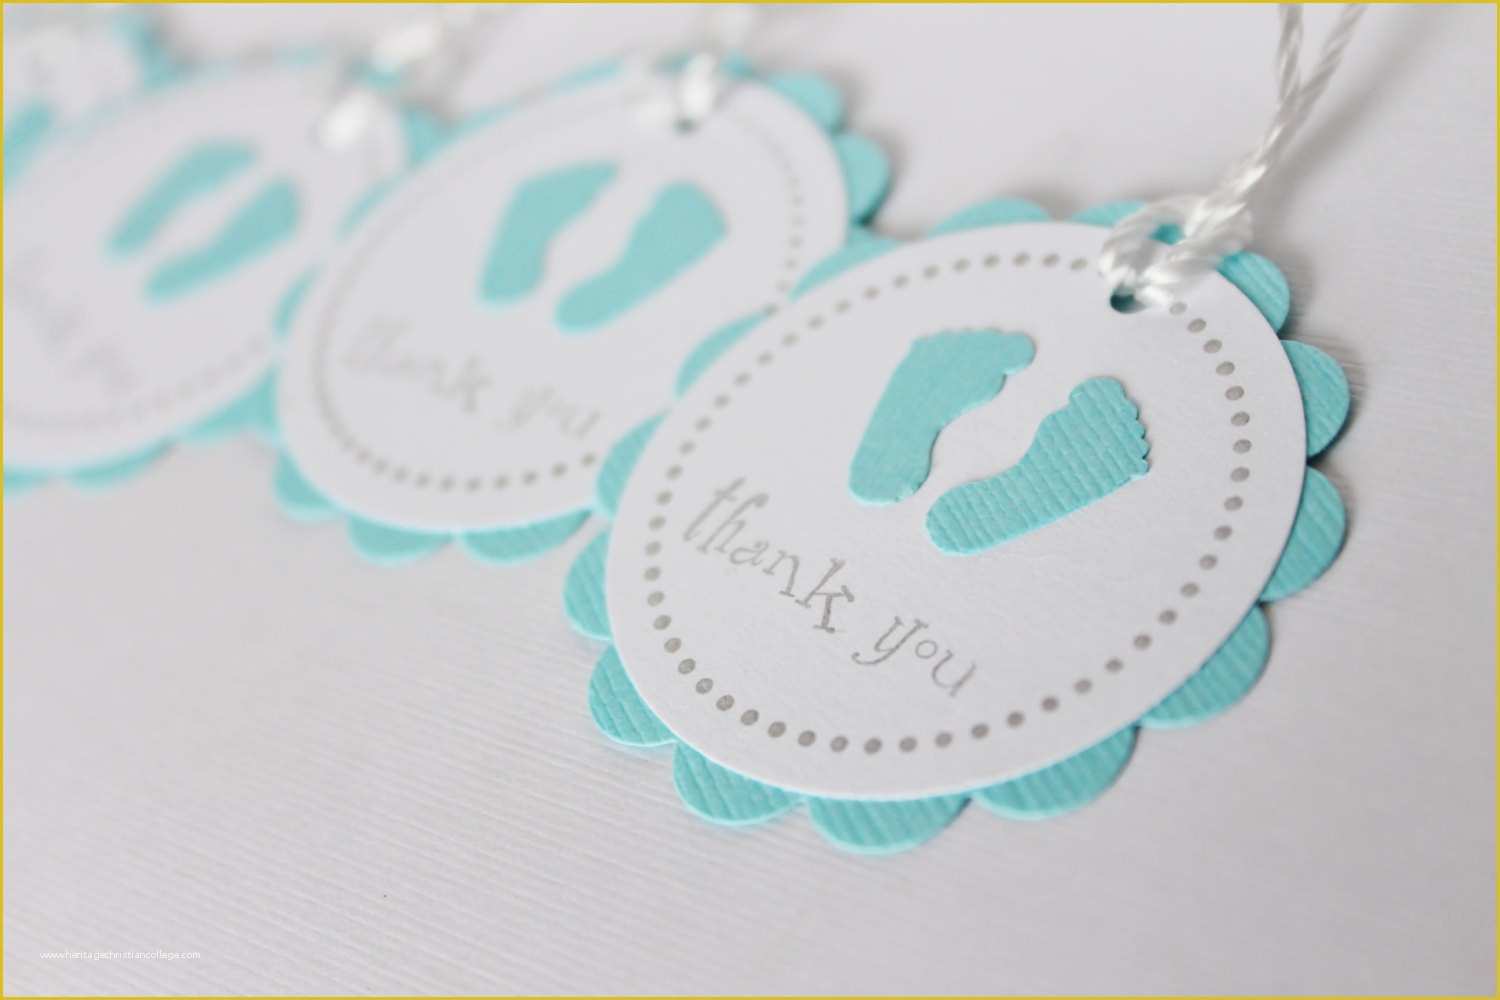 Free Printable Baby Shower Favor Templates